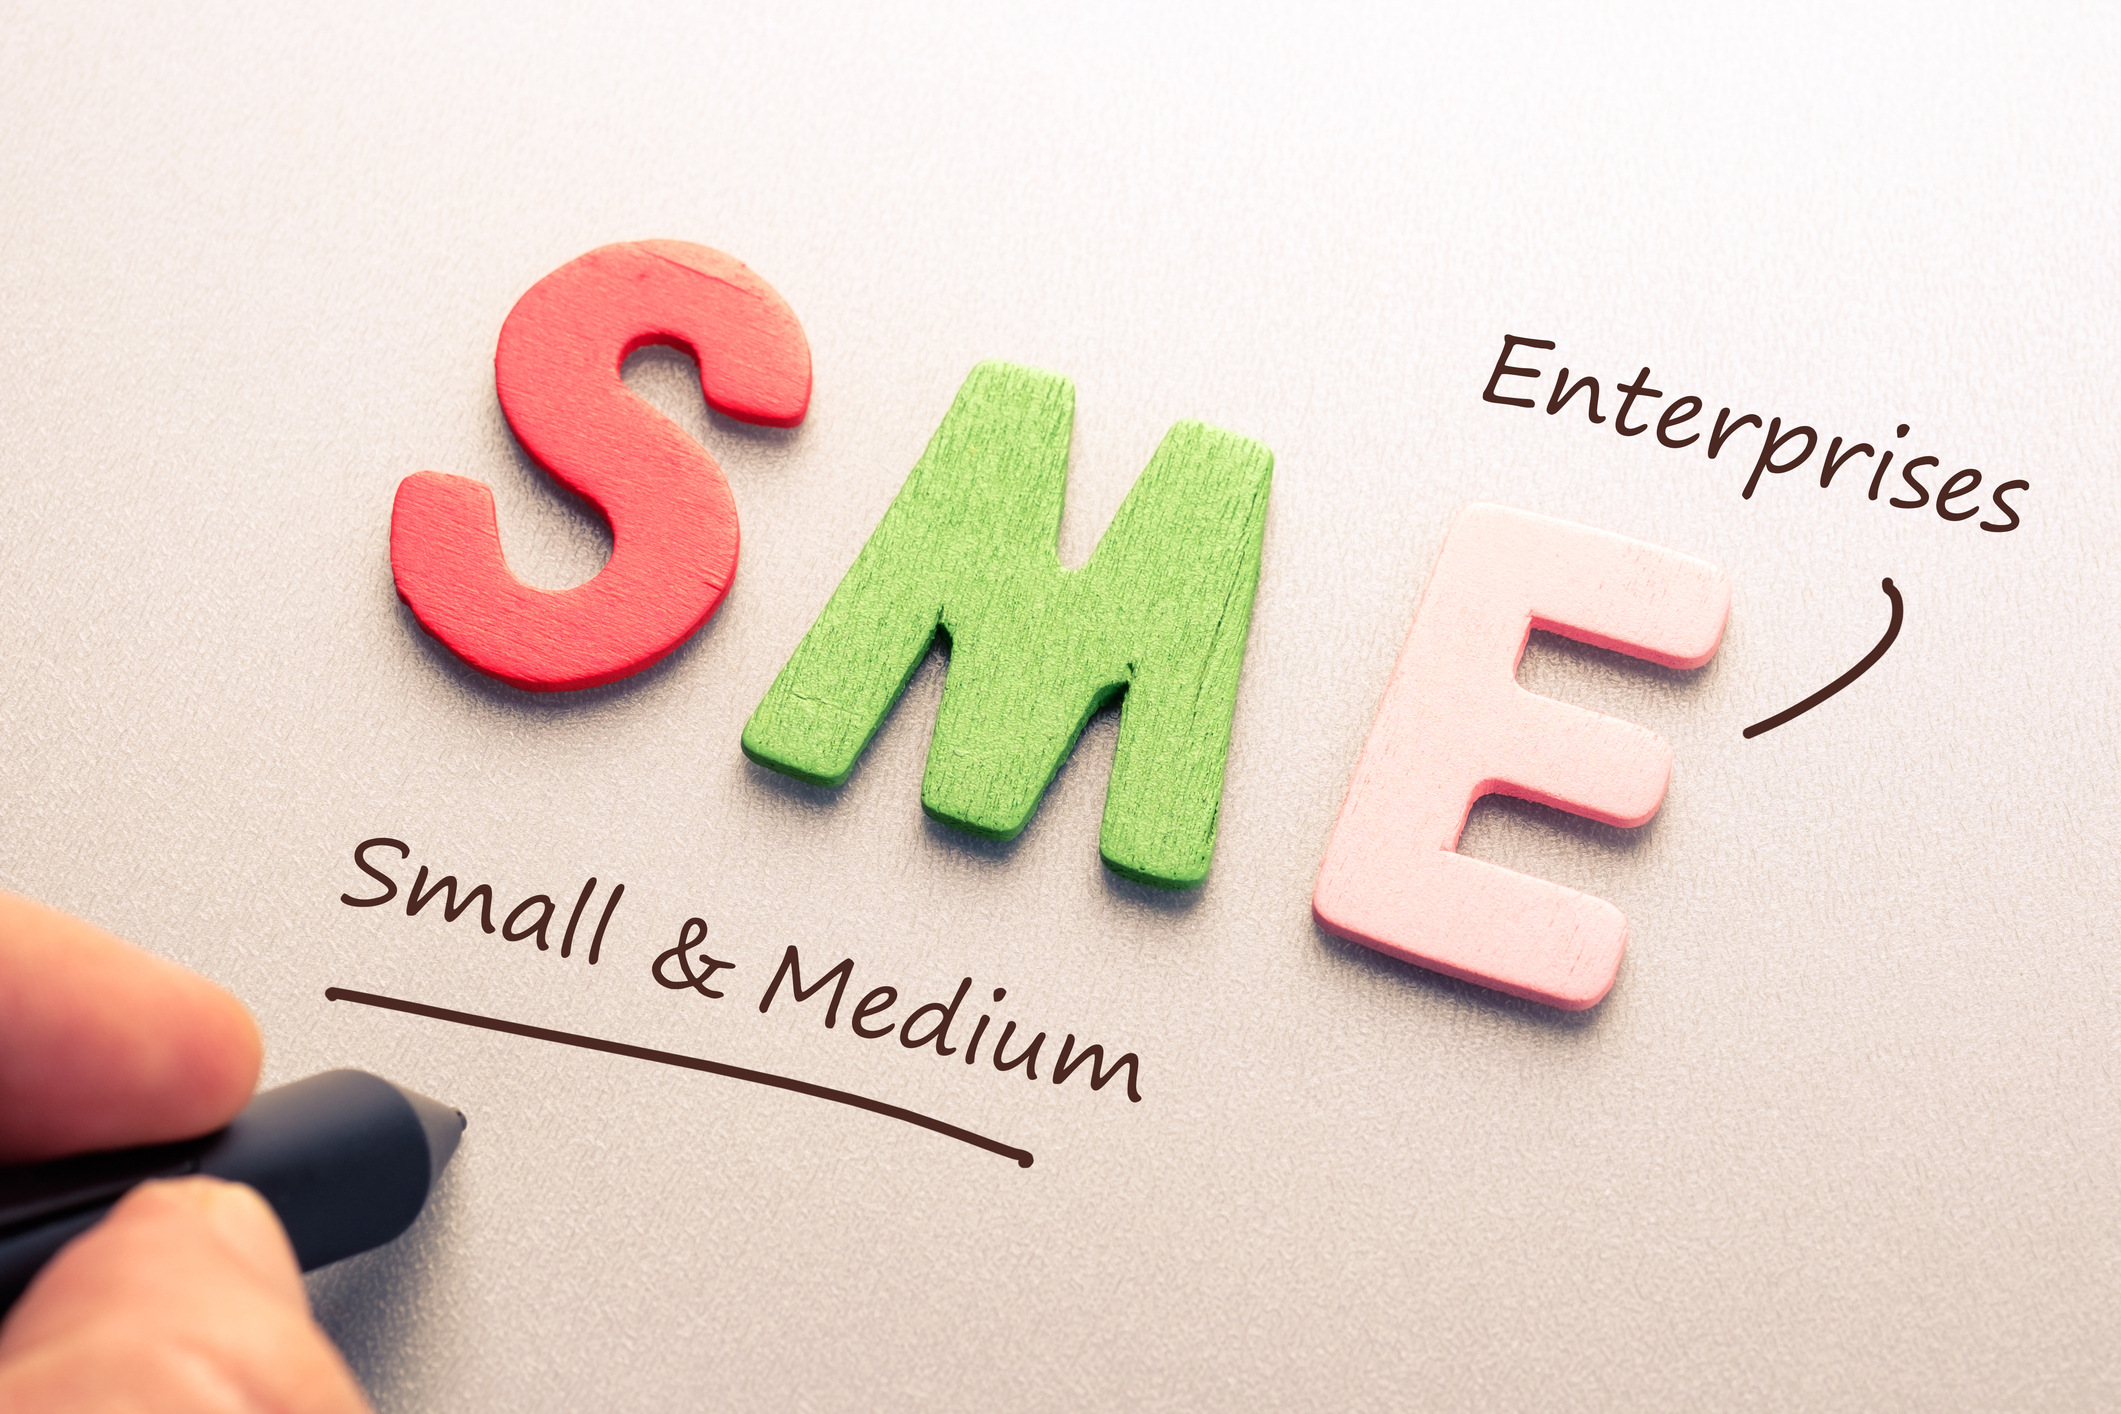 Adoption of knowledge management systems by small and medium enterprises ( SMEs) | RealKM